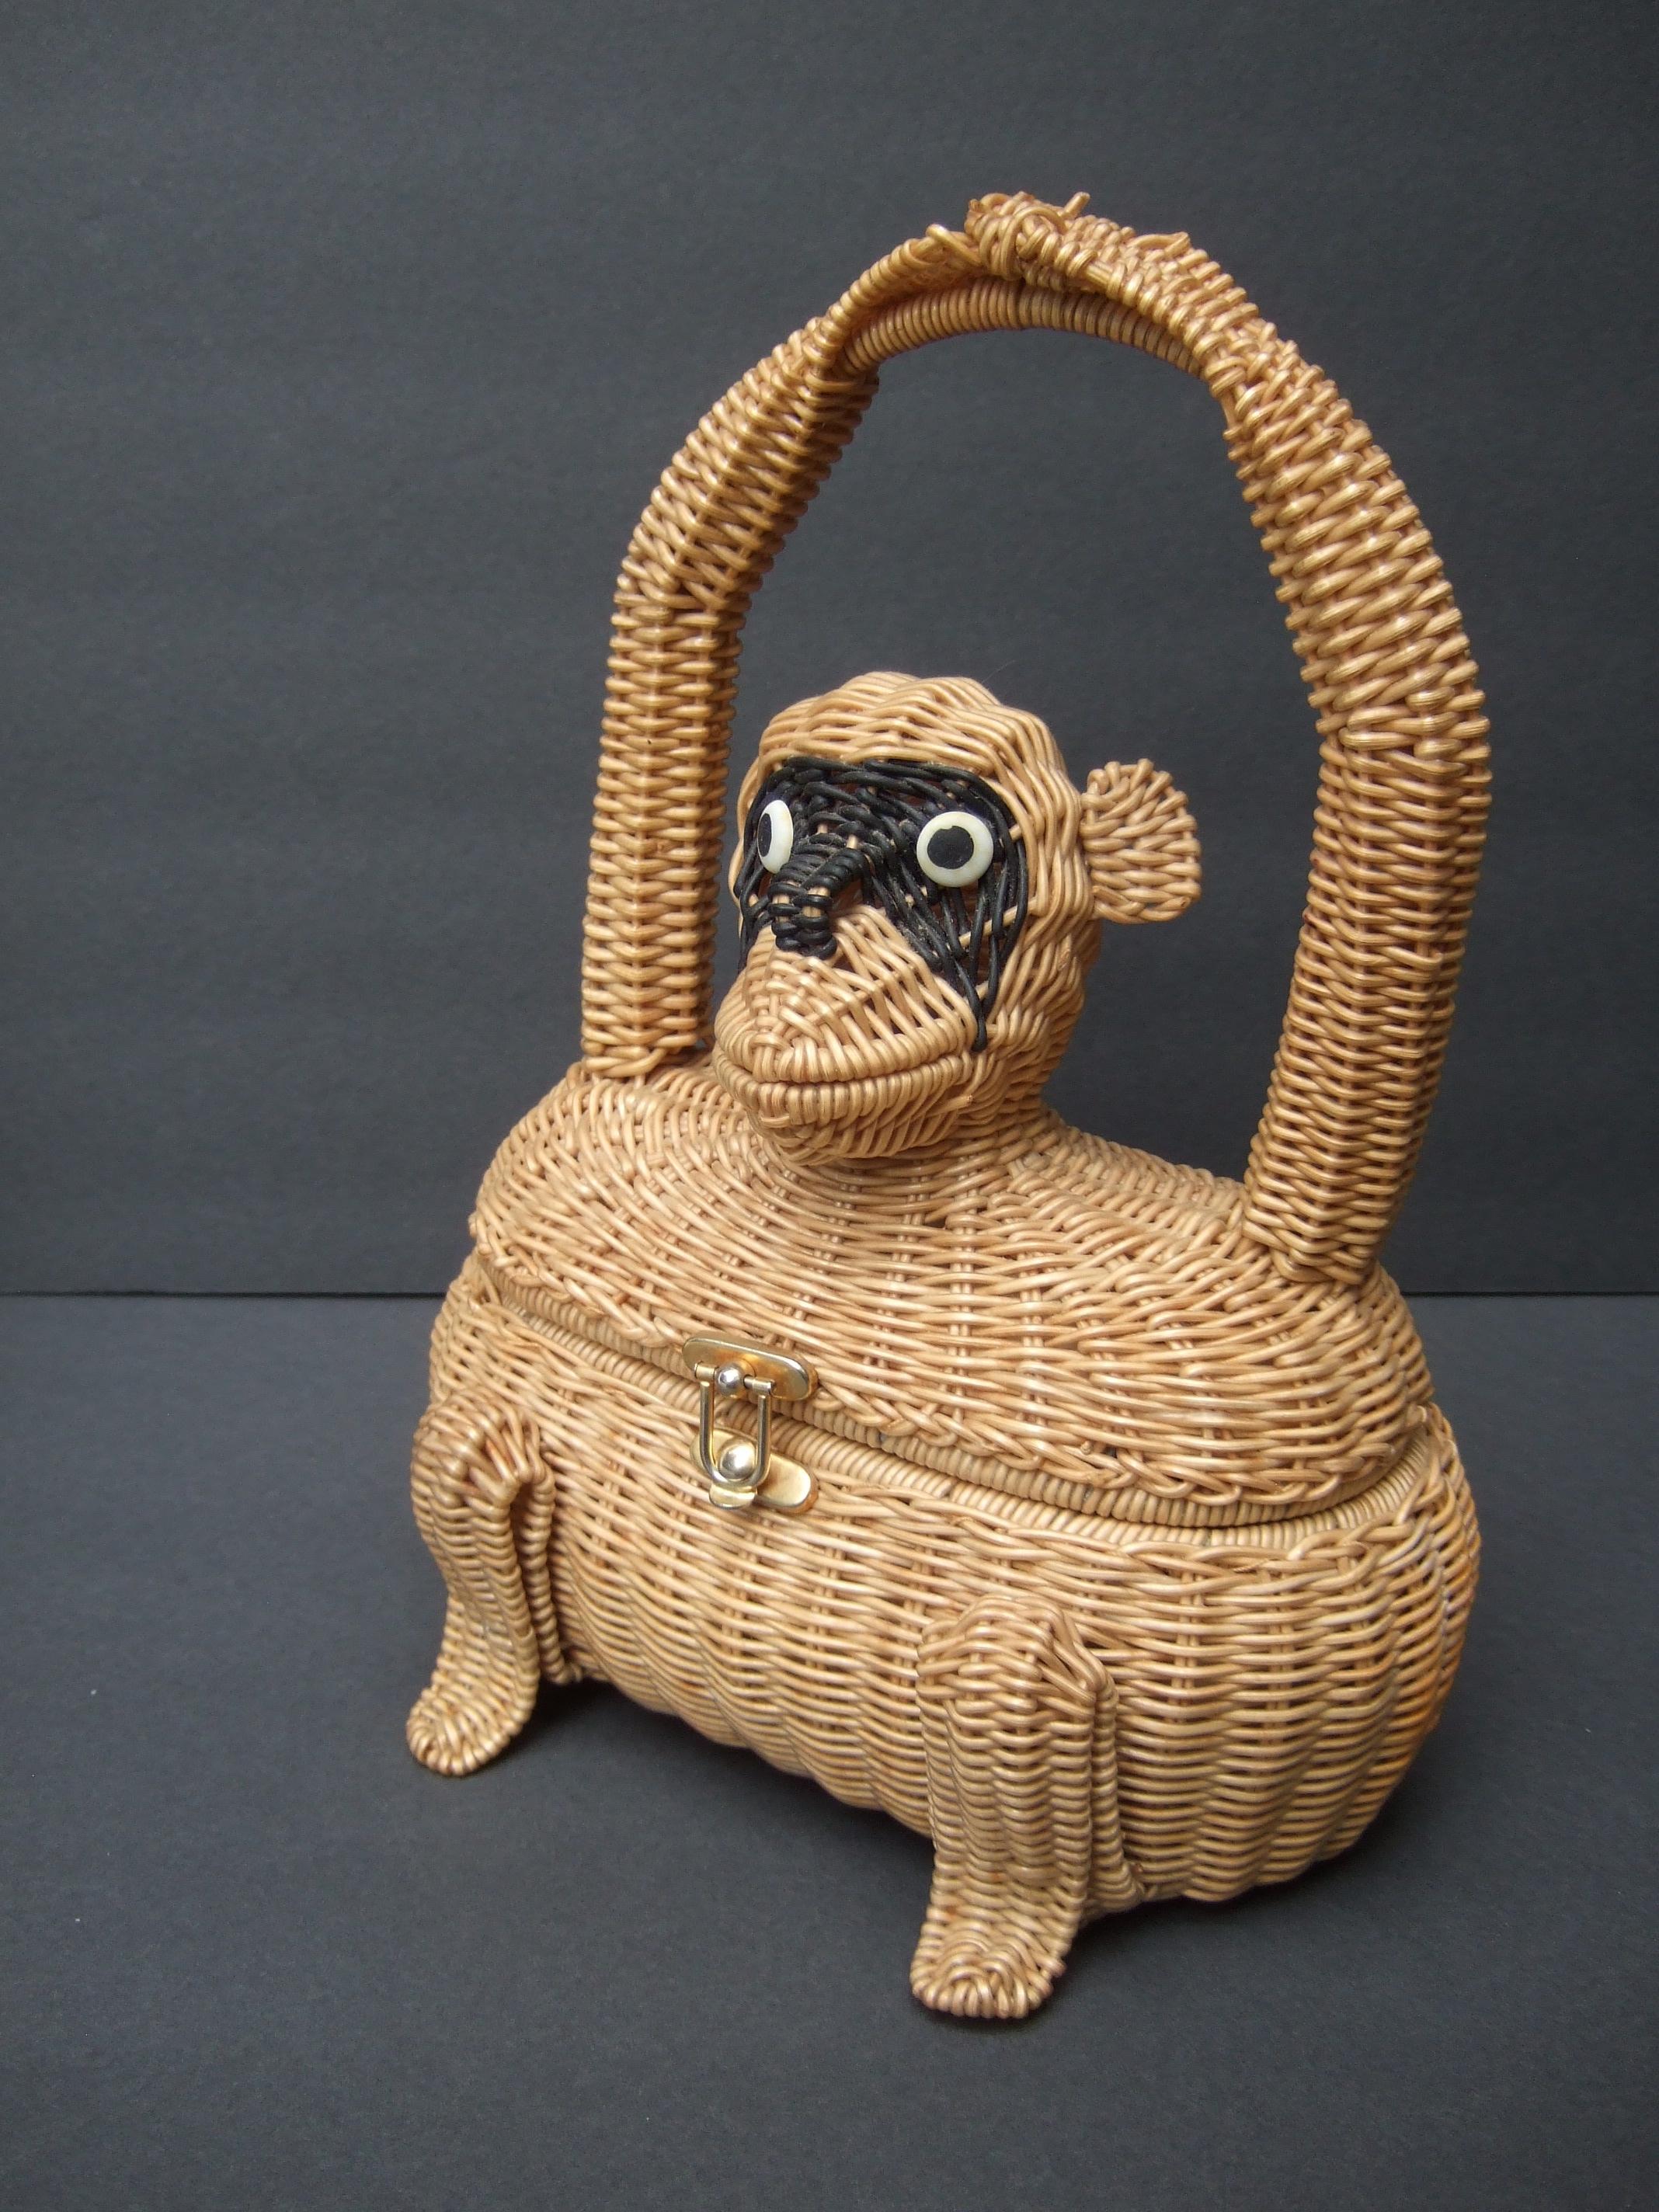 Whimsical Very Rare Wicker Monkey Handbag Designed by Marcus Brothers c 1960 For Sale 7